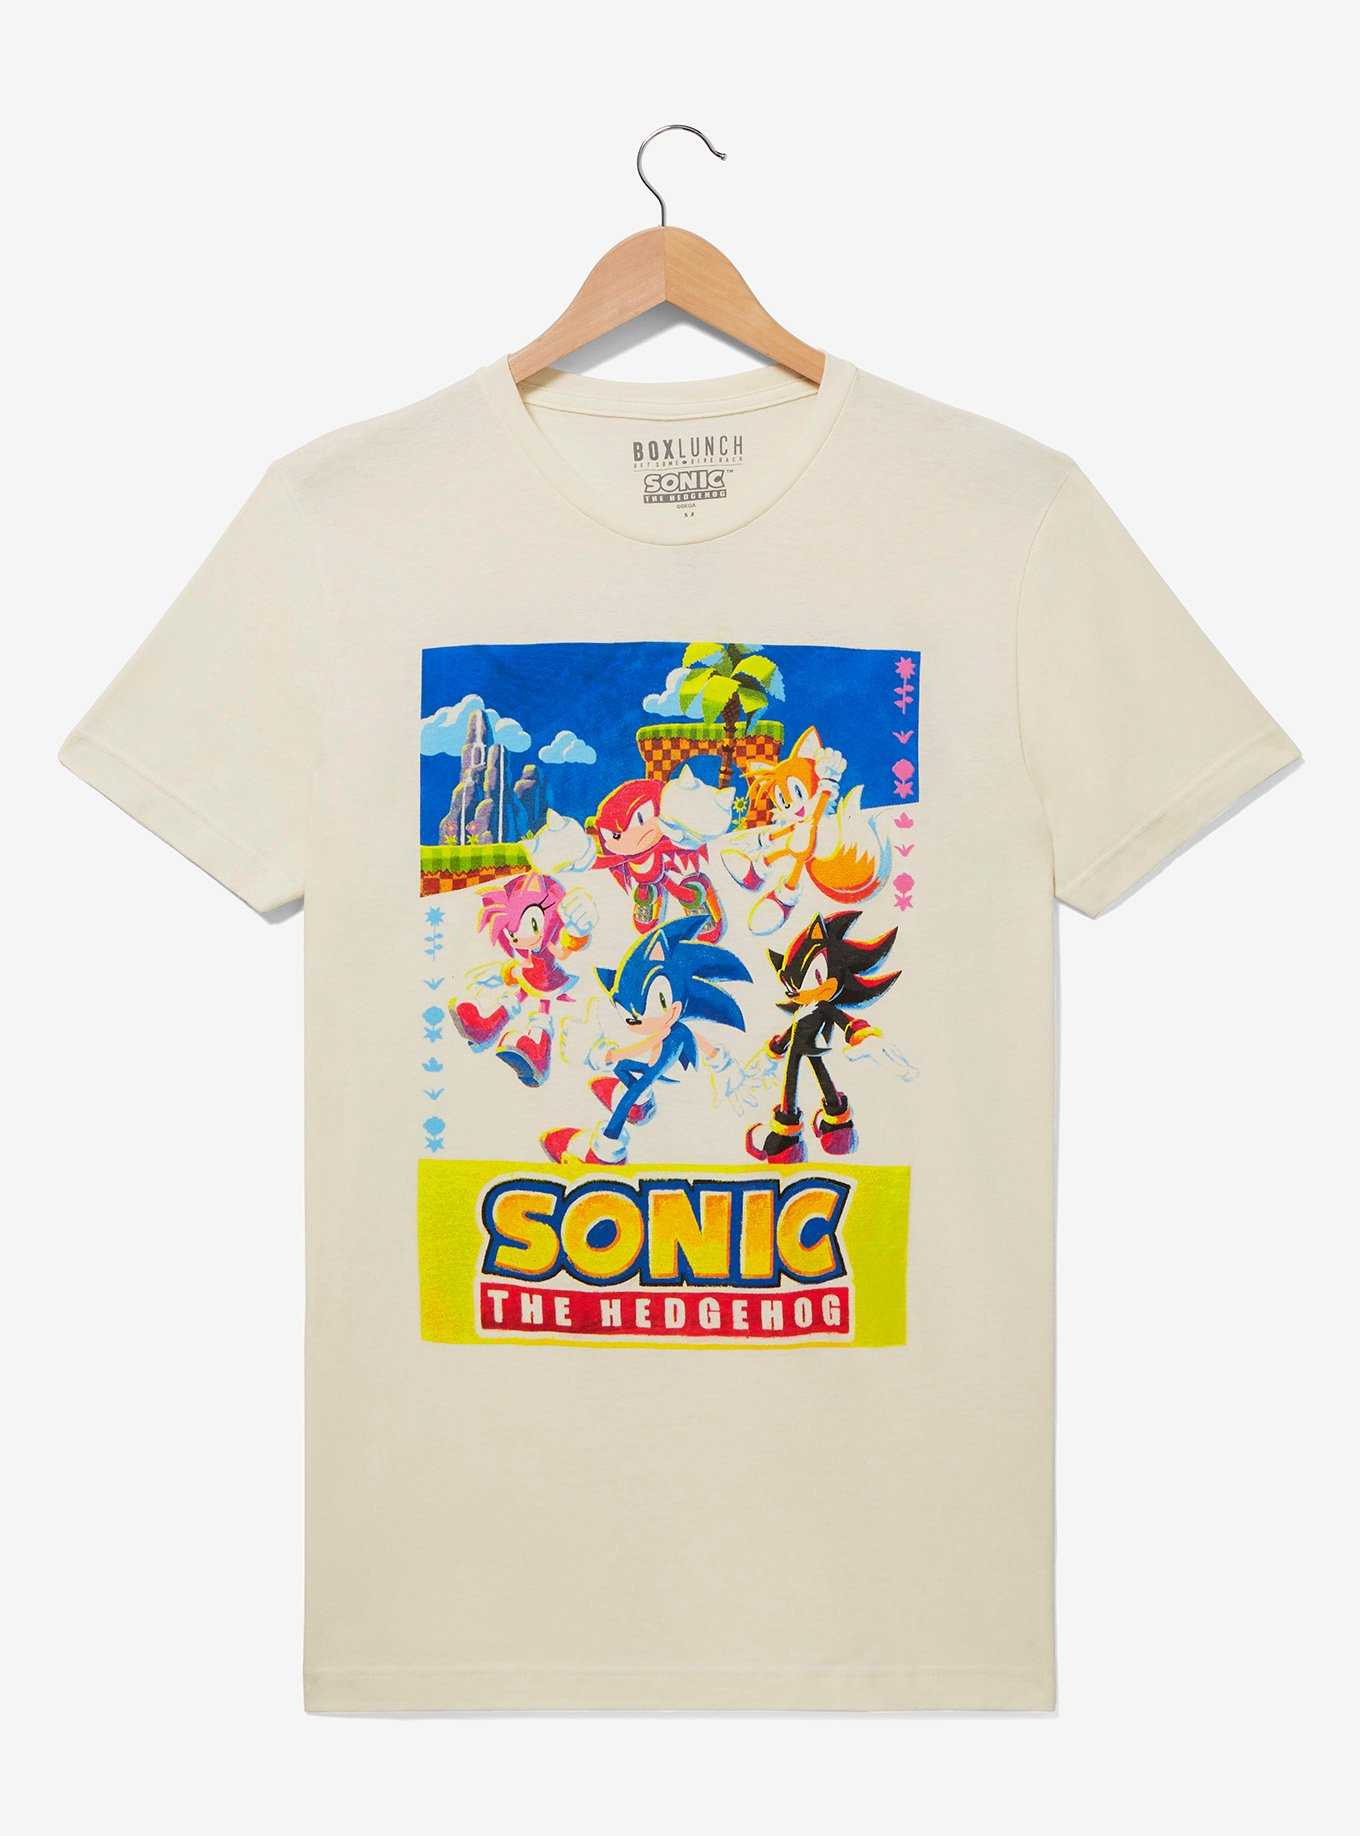 Sonic the Hedgehog Group Portrait T-Shirt - BoxLunch Exclusive, , hi-res